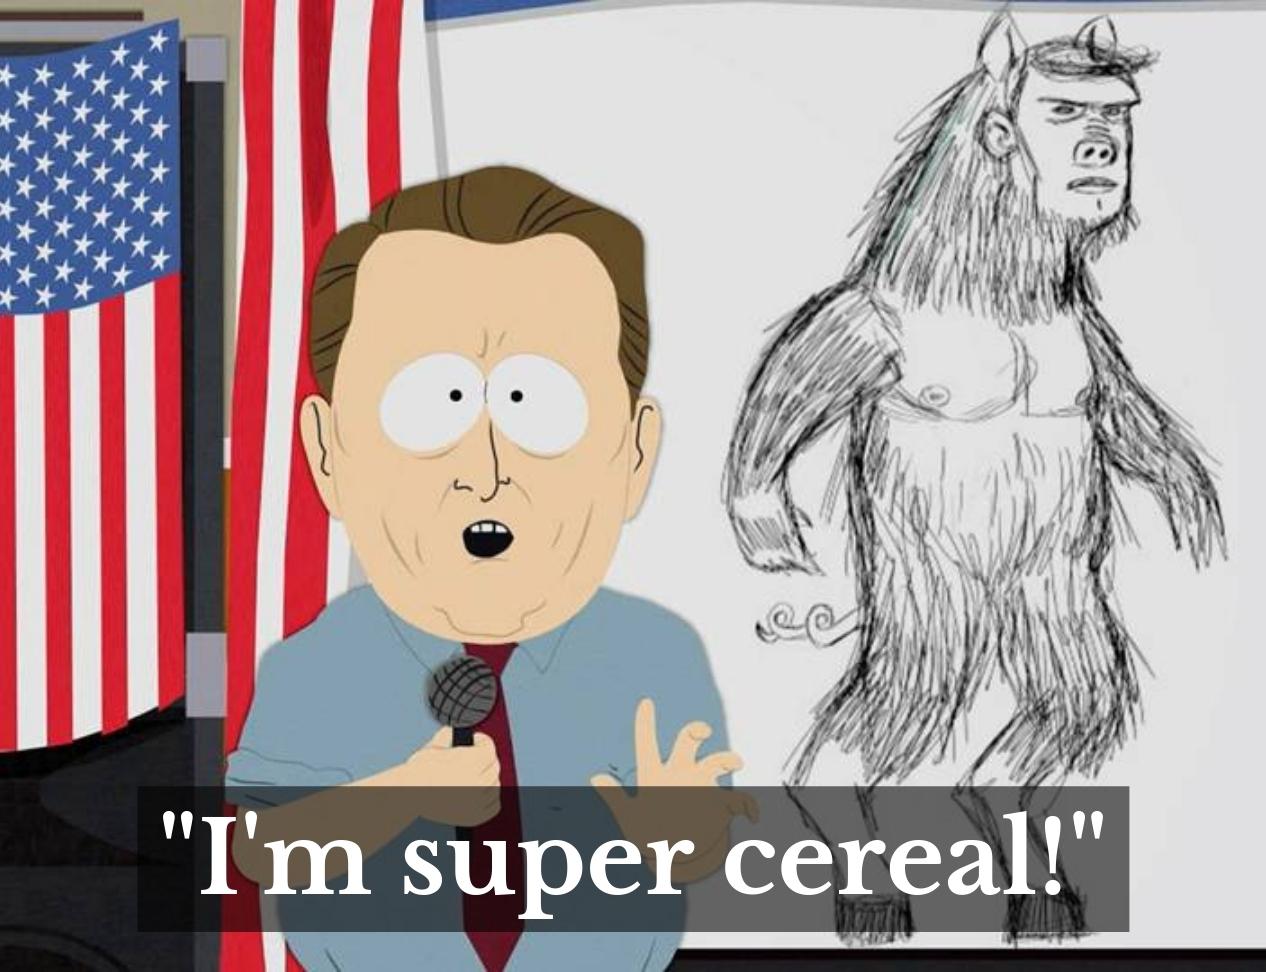 South Park quote, "I'm super cereal."